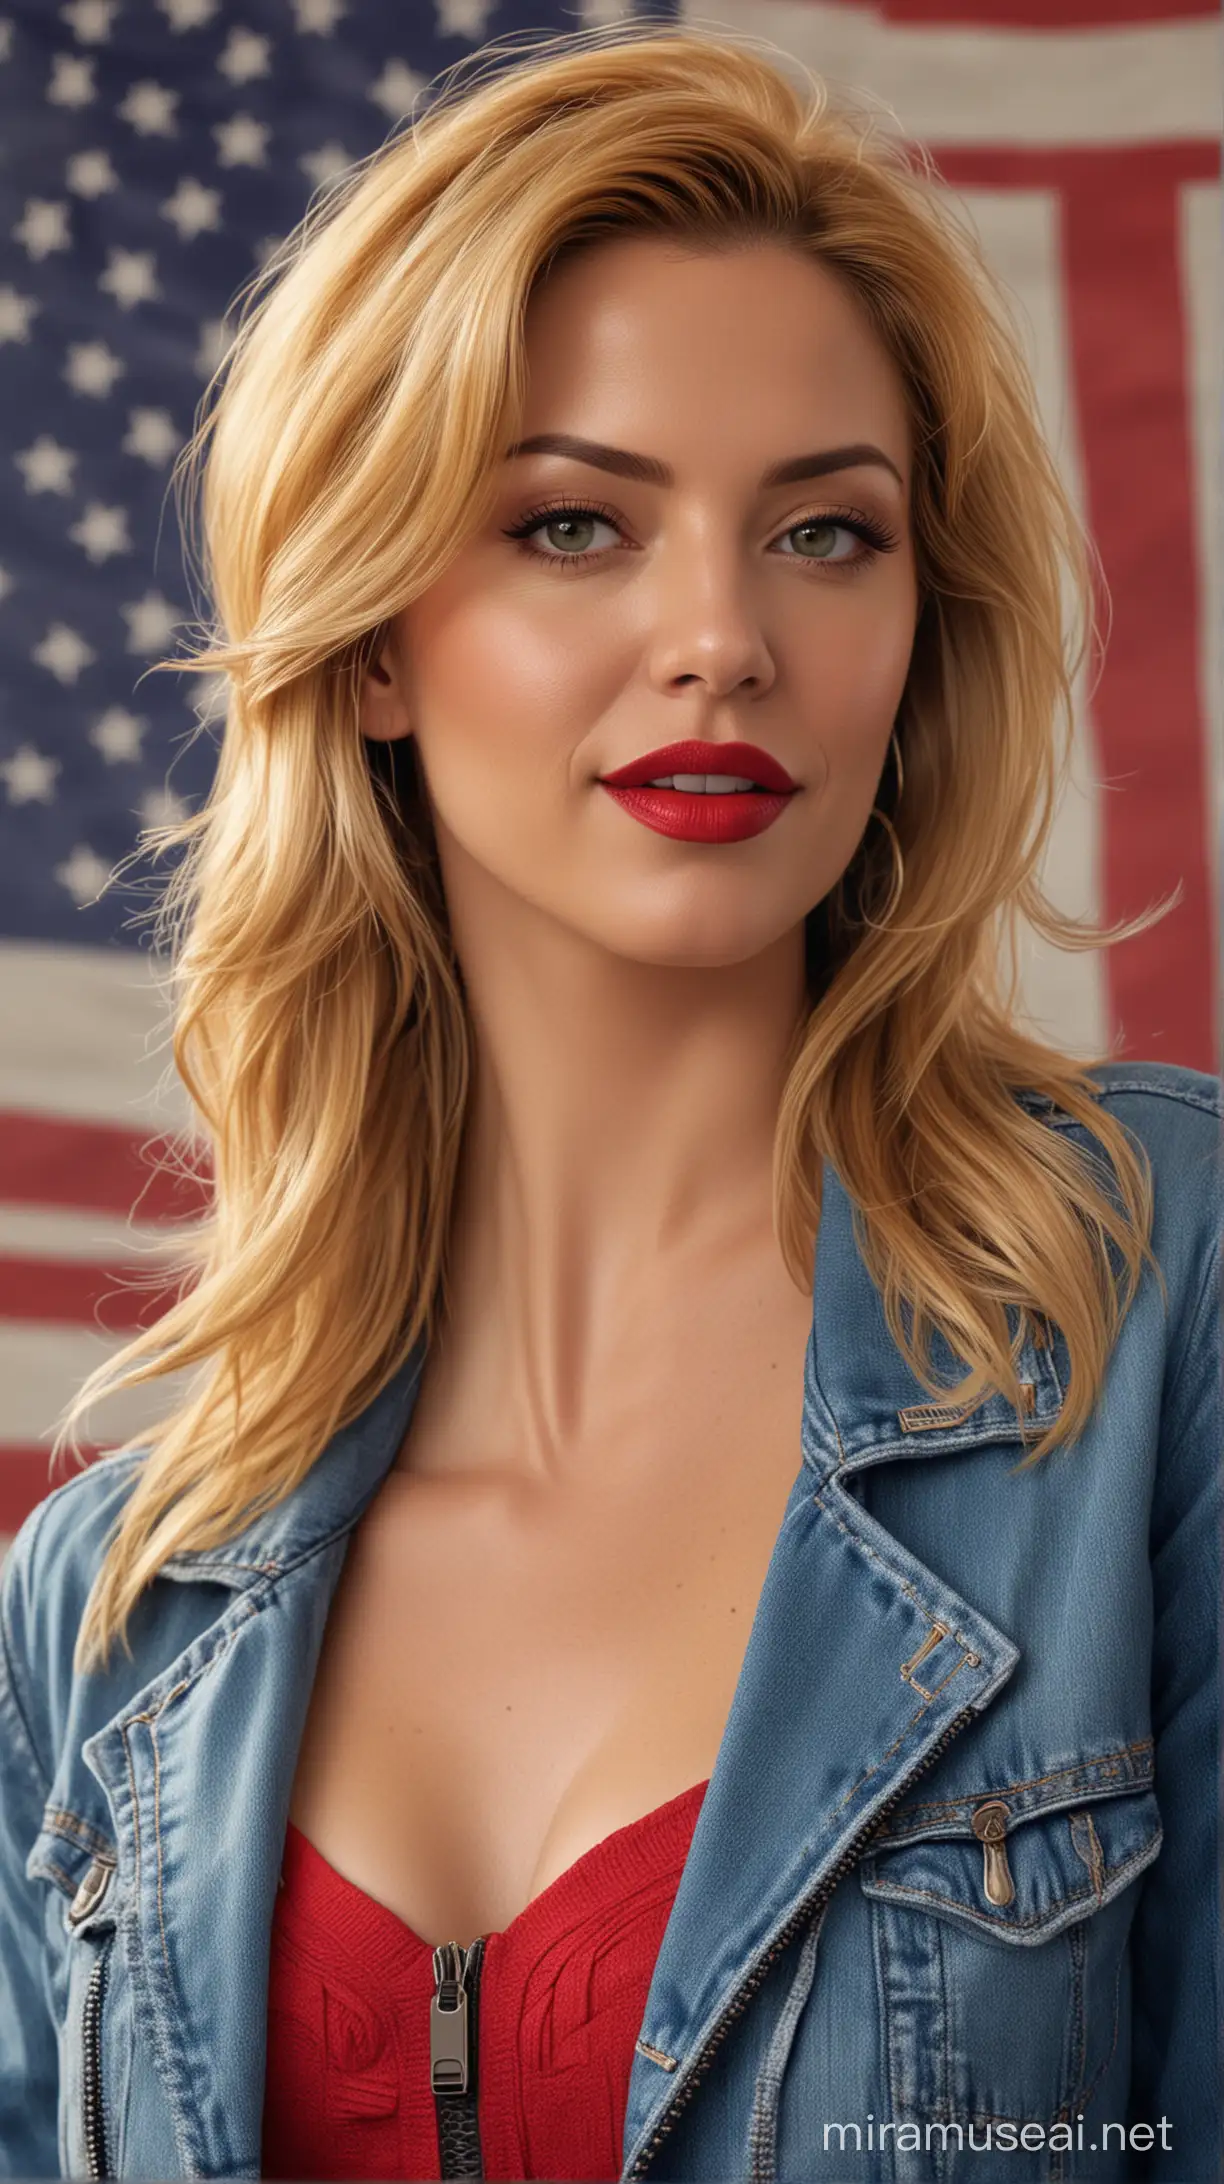 4k Ai art front view beautiful USA 50 years old hot lady golden hair red lipstick ear tops blue jeans and zipper jacket in usa appointment